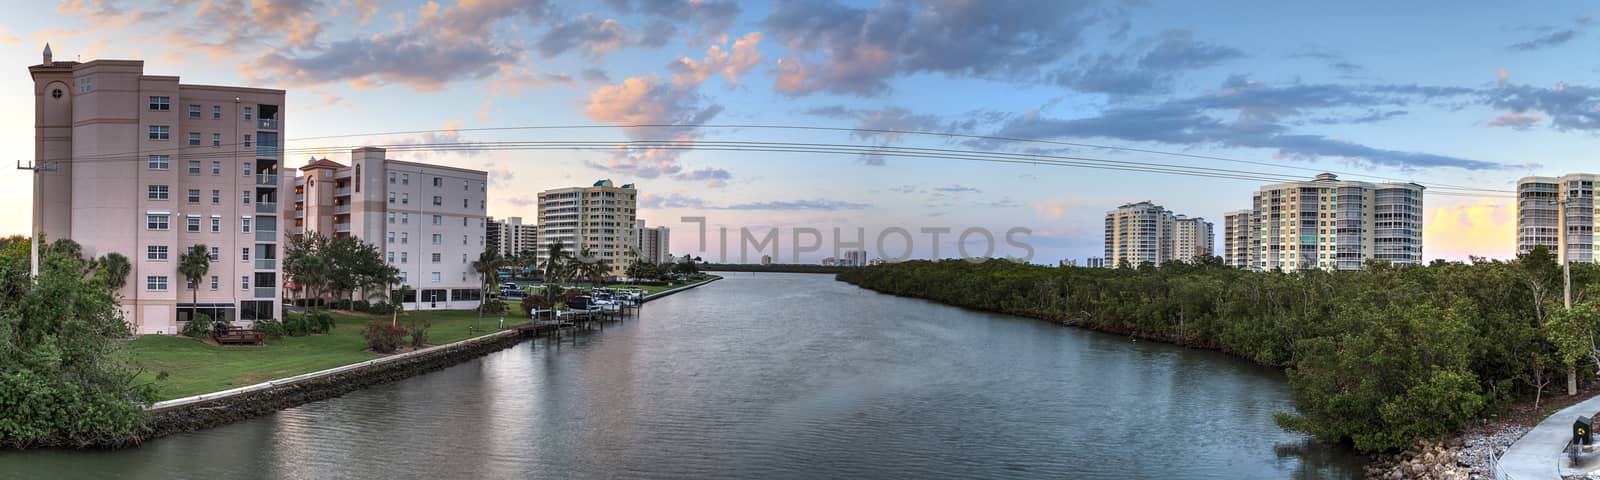 Sunset sky and clouds over the Vanderbilt Channel river by steffstarr